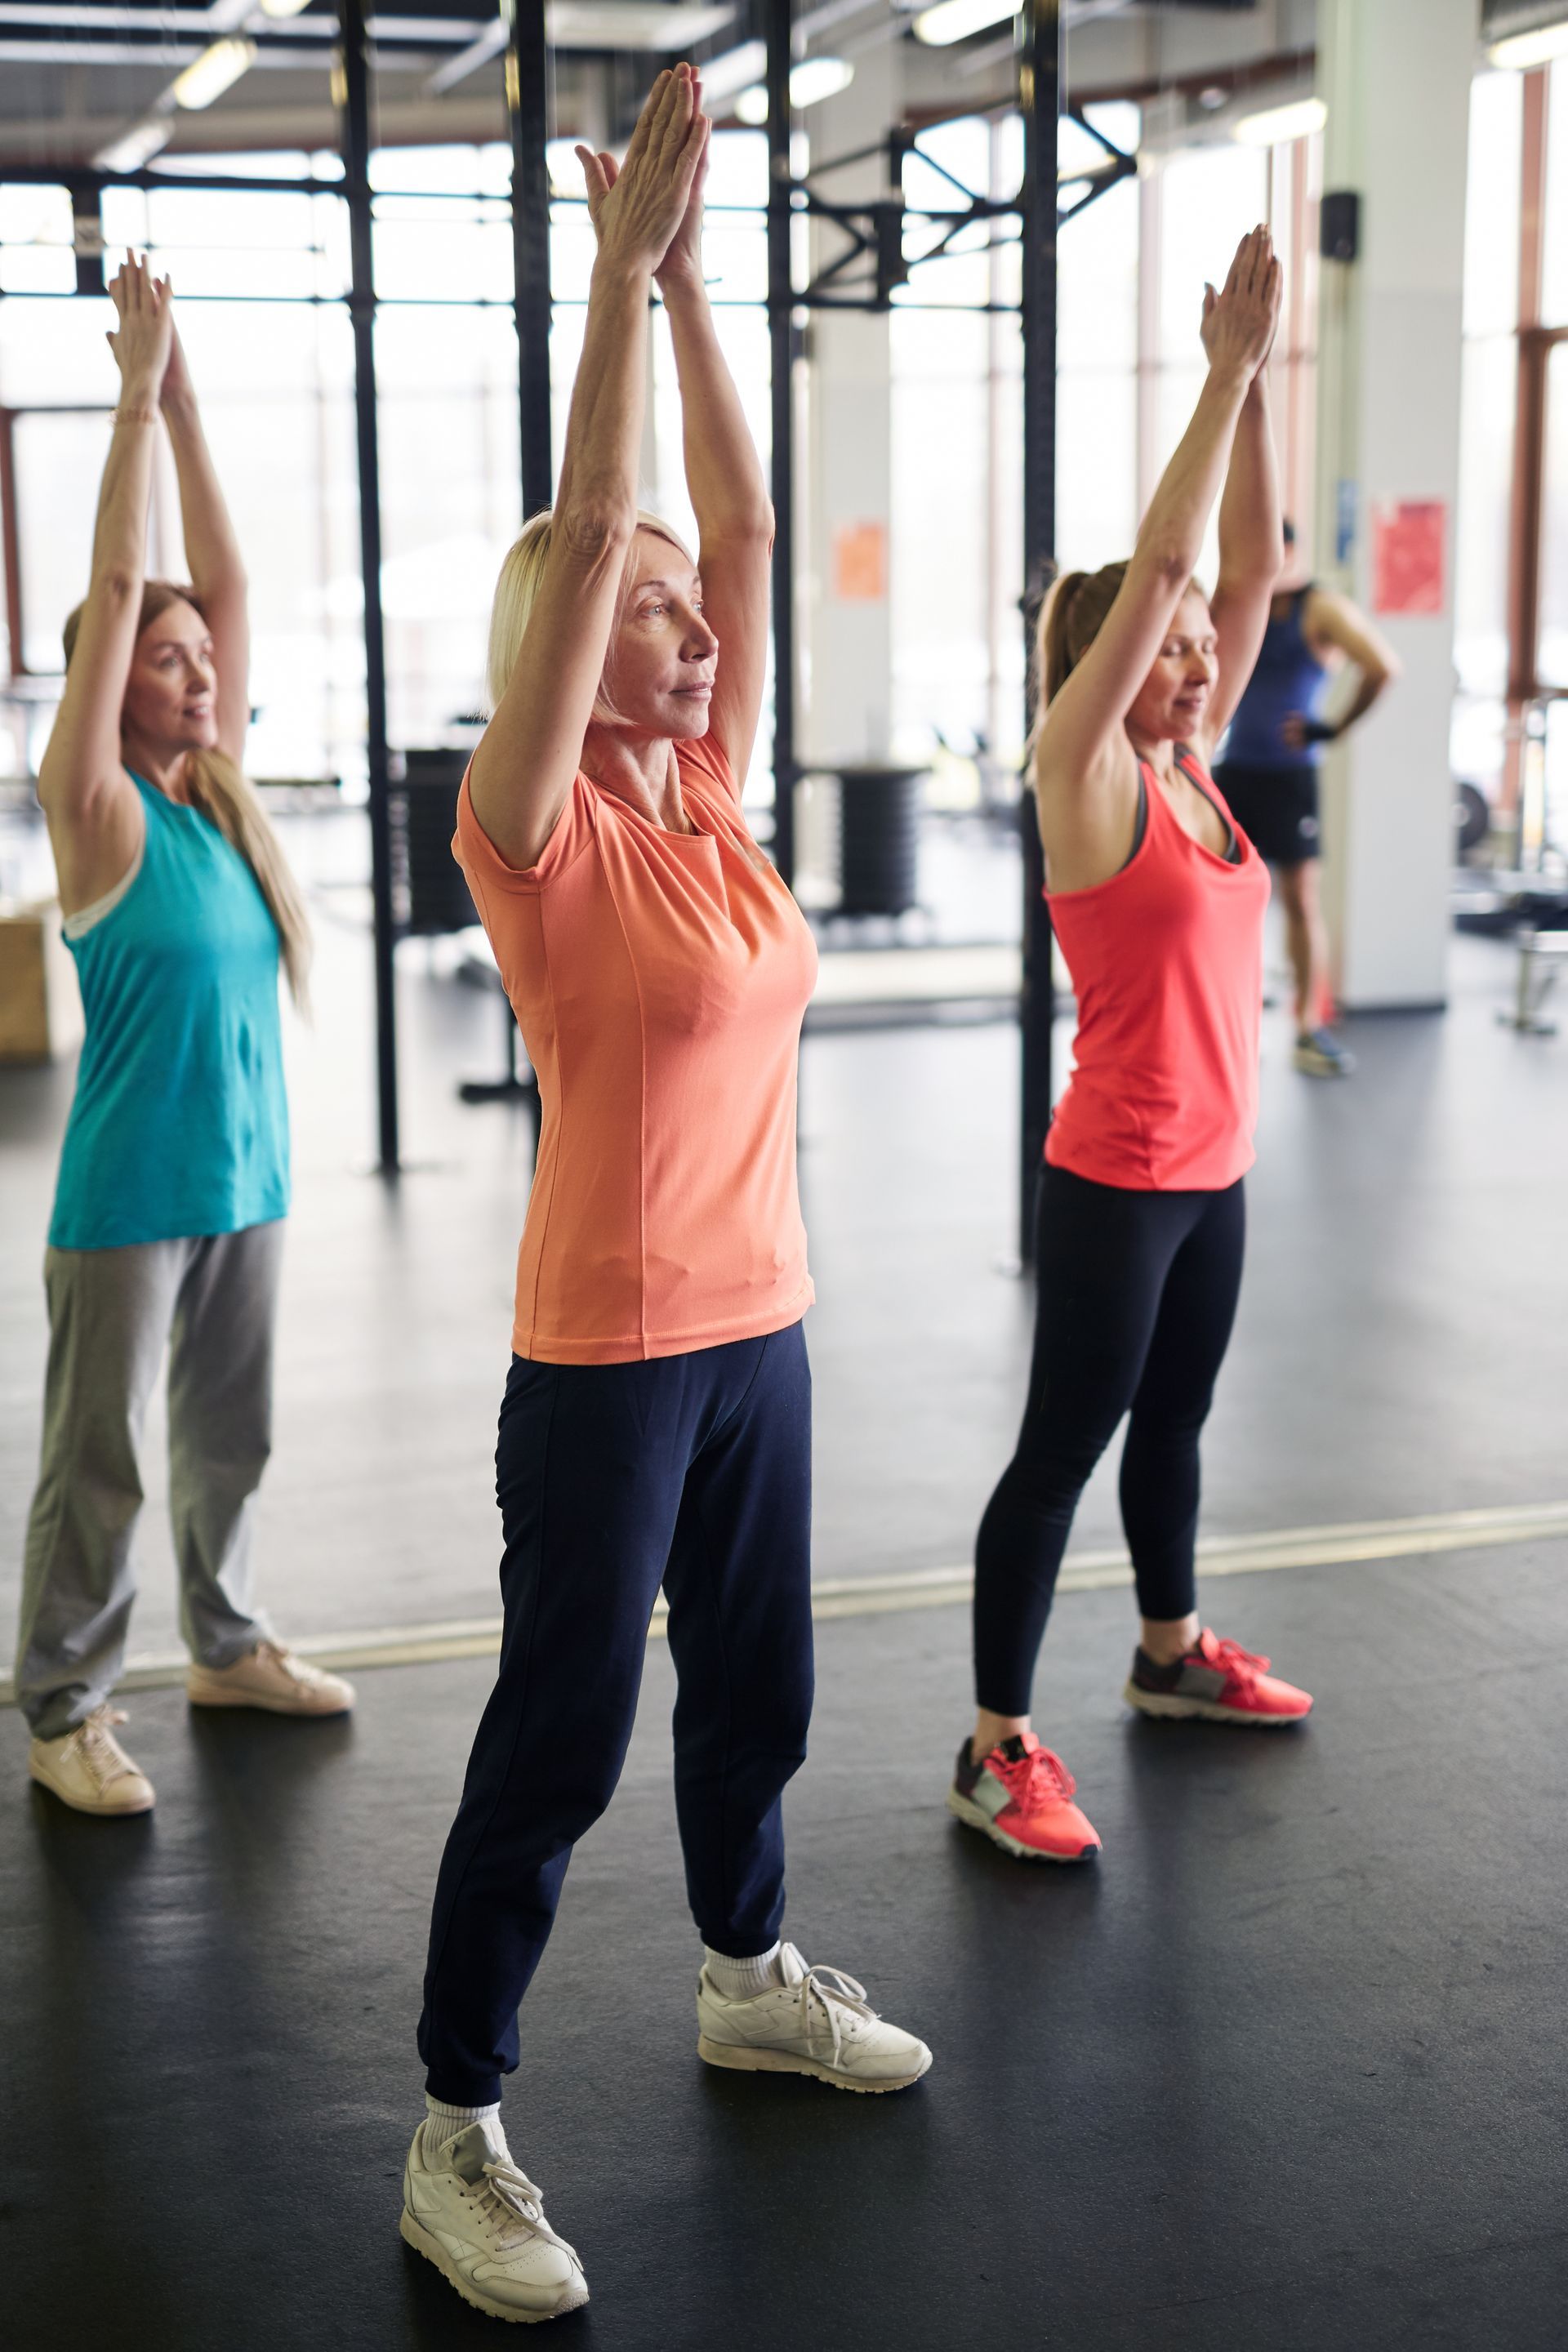 group of women stretching in gym